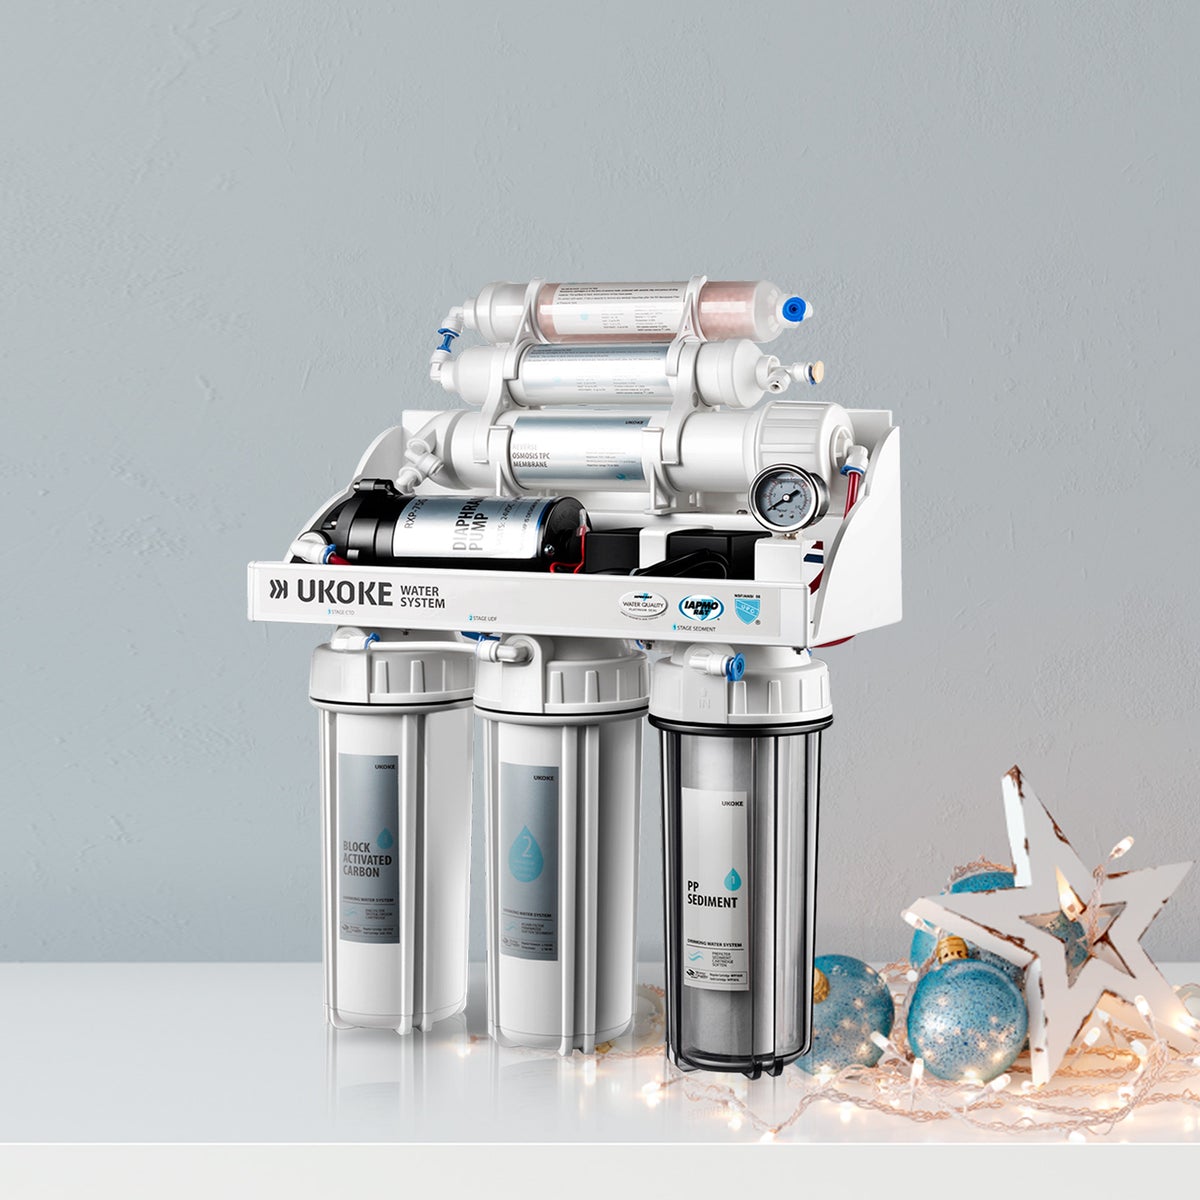 Ukoke 6 Stages Reverse Osmosis, Water Filtration System, 75 GPD with Pump $139+FS